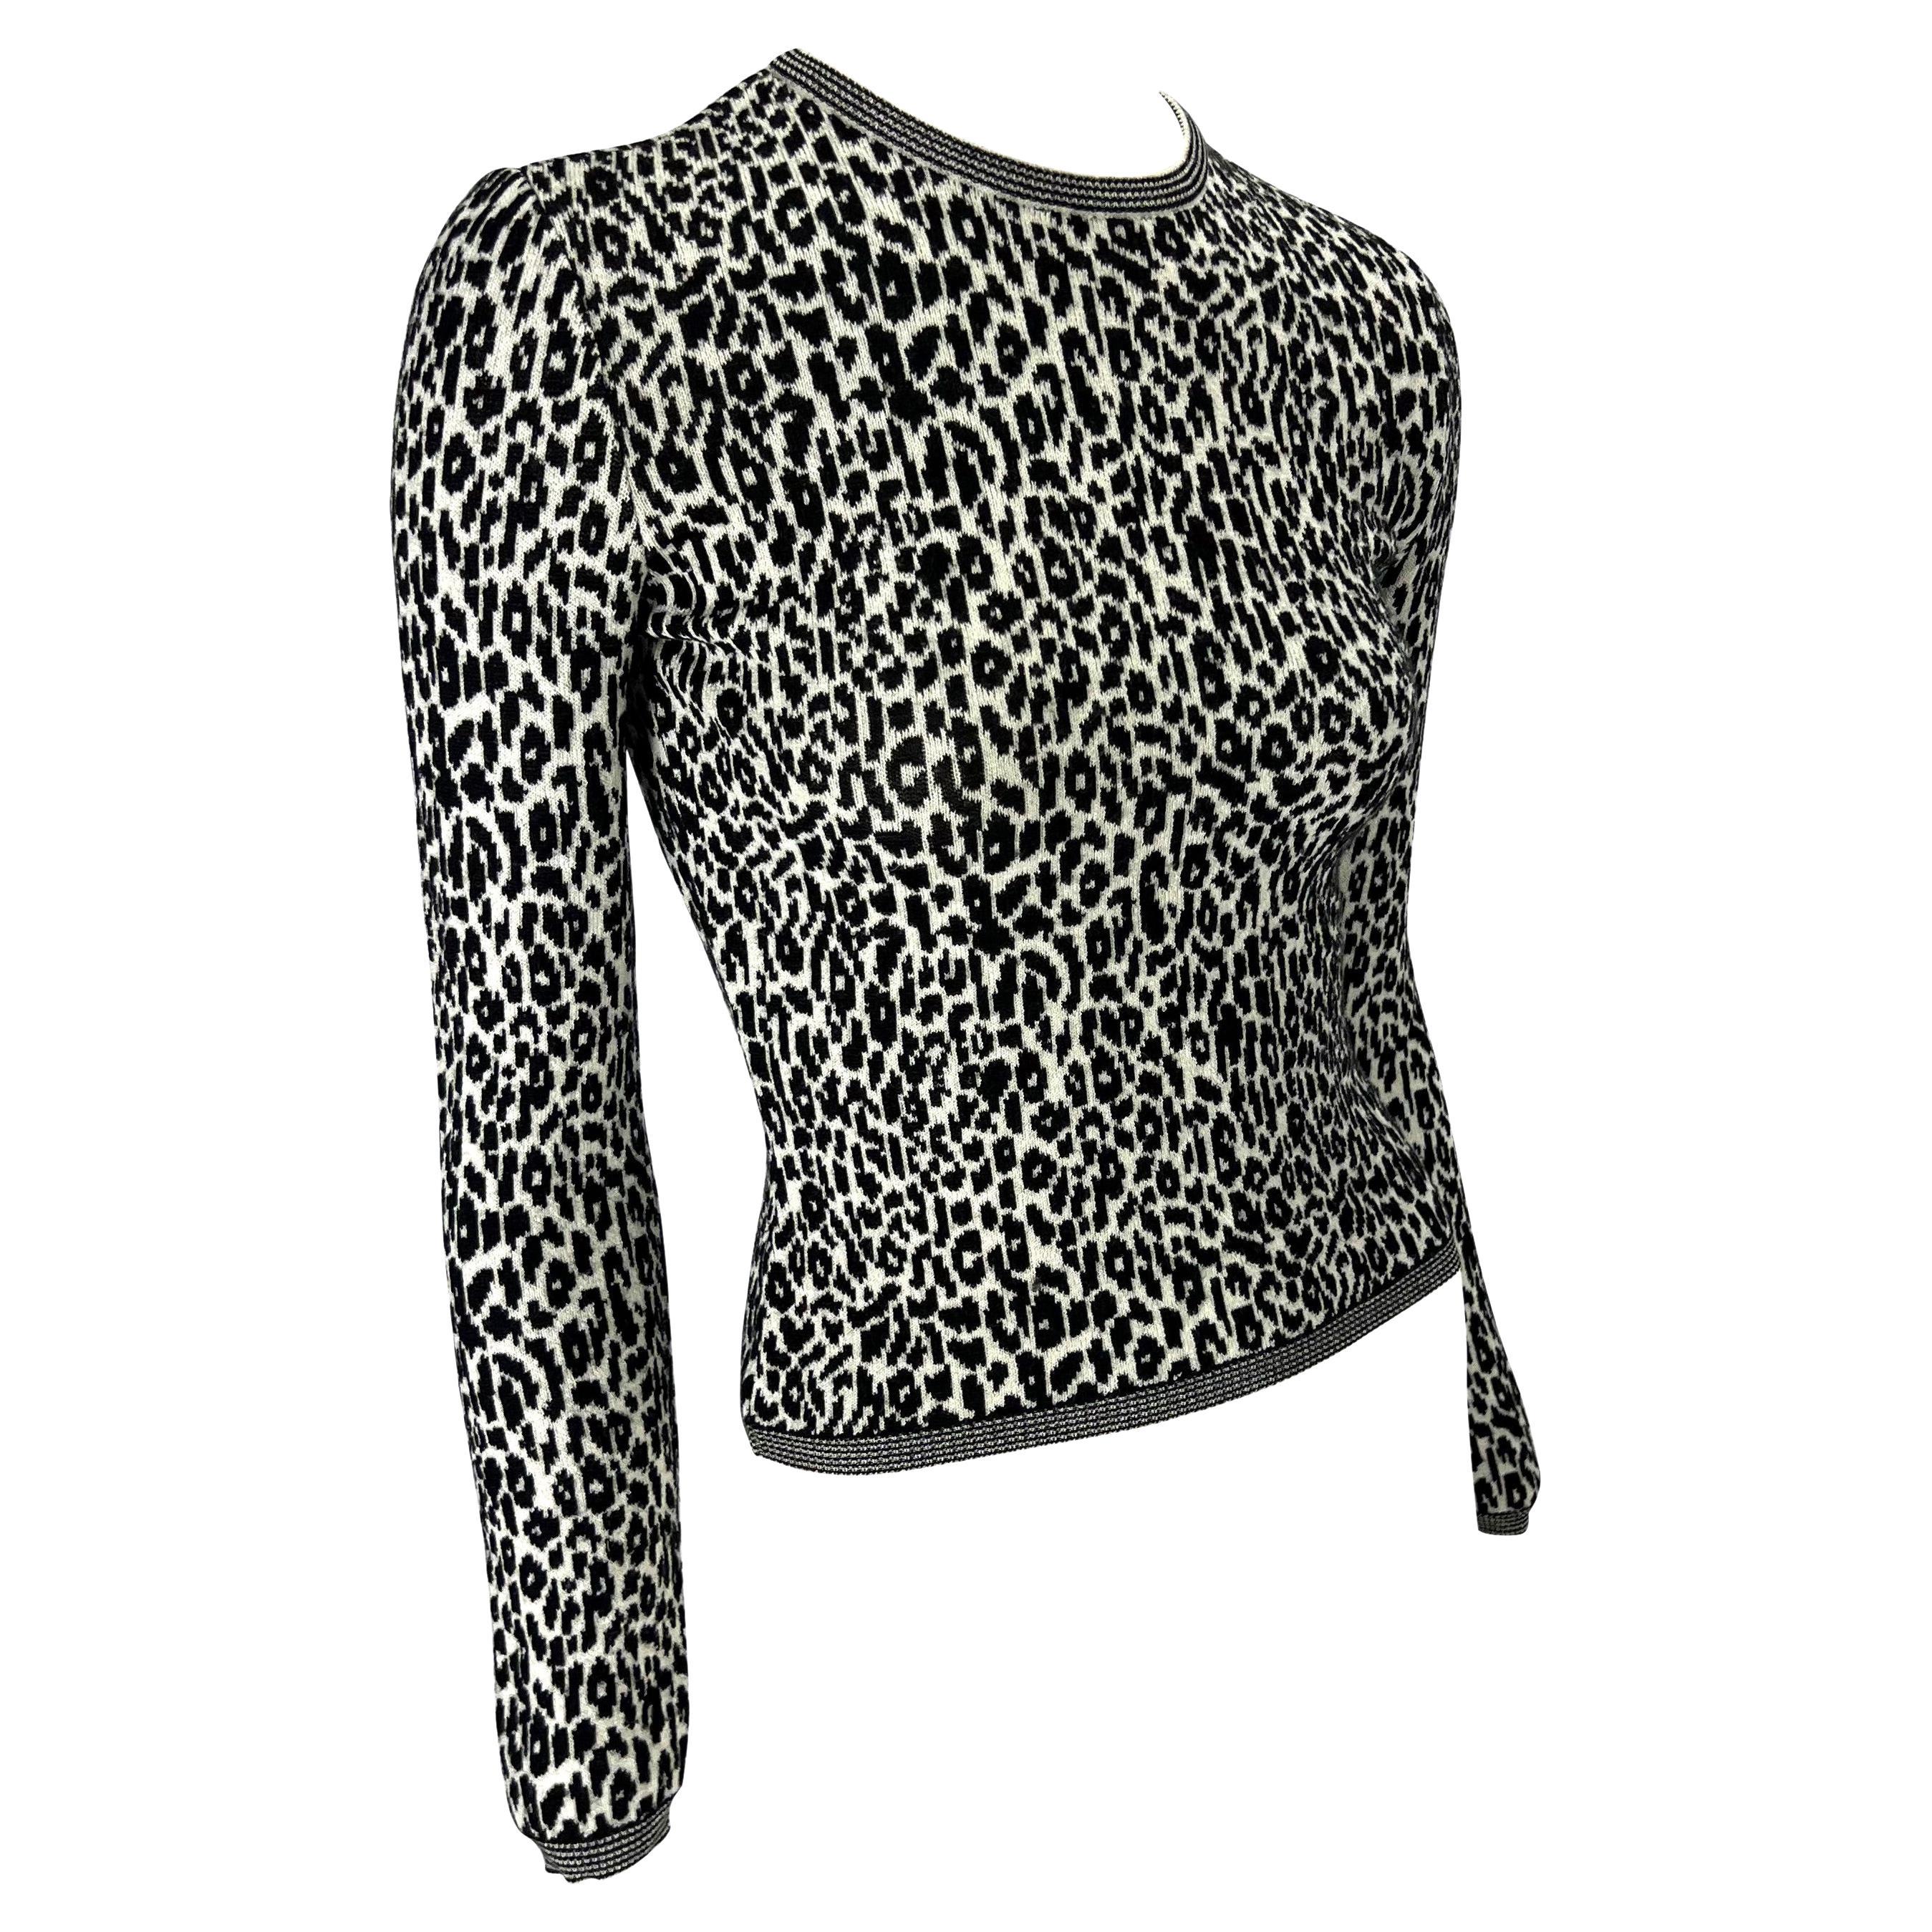 1990s Gianni Versace Black White Cheetah Print Stretch Knit Sweater Top In Good Condition For Sale In West Hollywood, CA